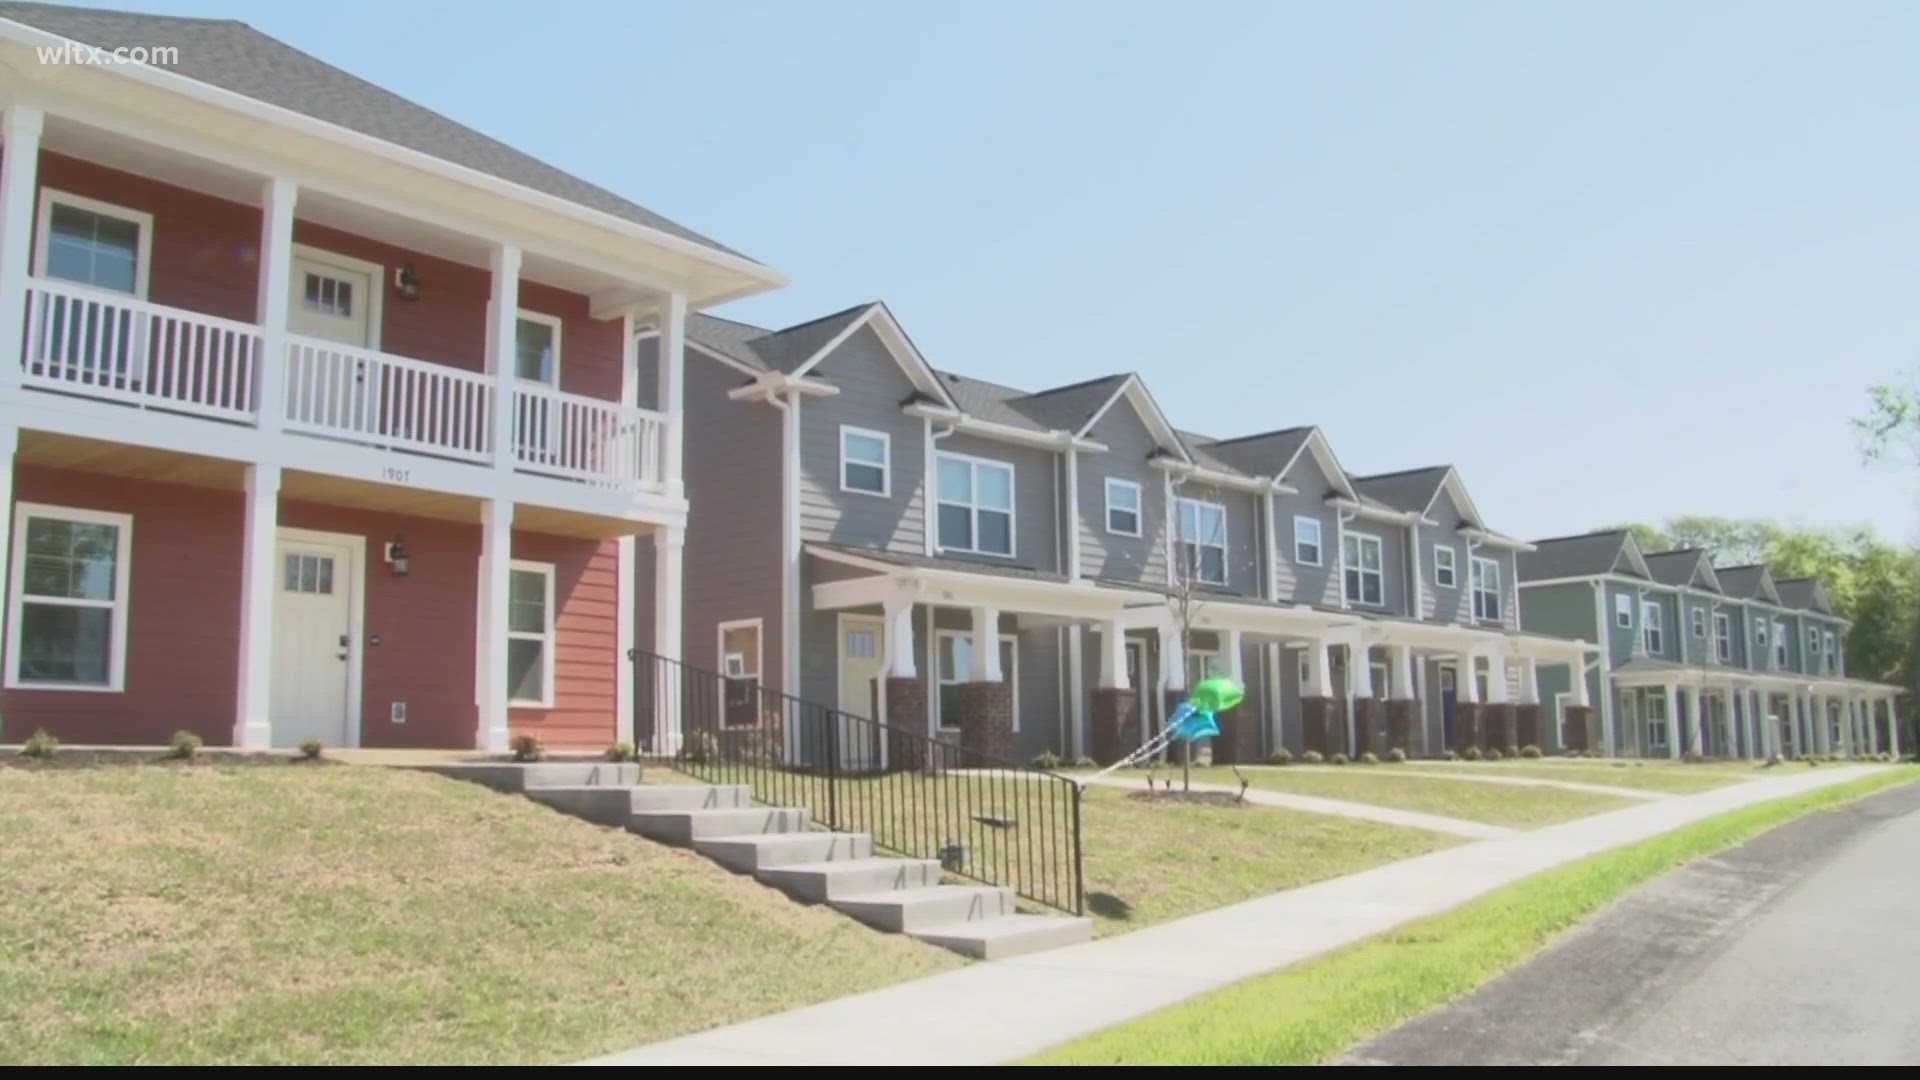 The state of South Carolina still has $17M to help families stay in their home.